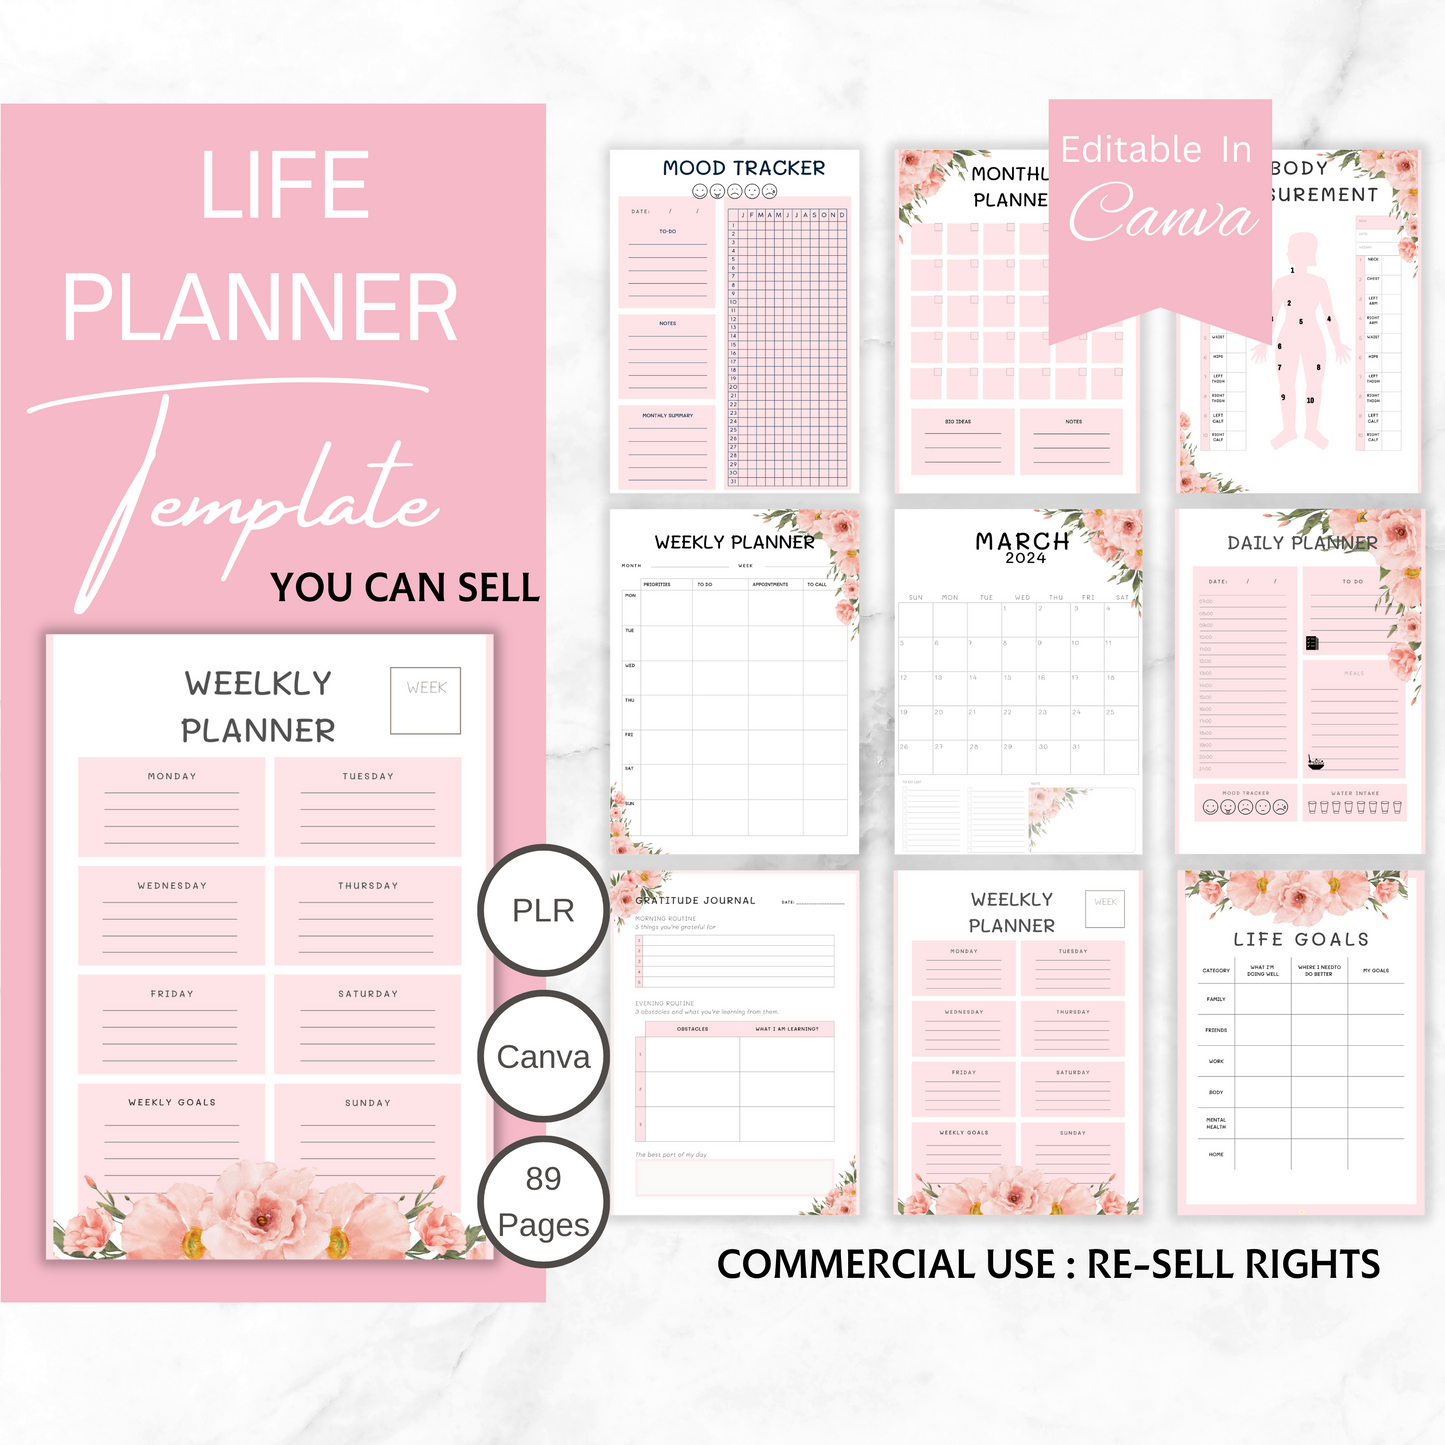 PLR Life Planner Template, Printable PDF with Commercial License to Resell, PLR Printables, Canva Template Commercial, Diary, Calendar